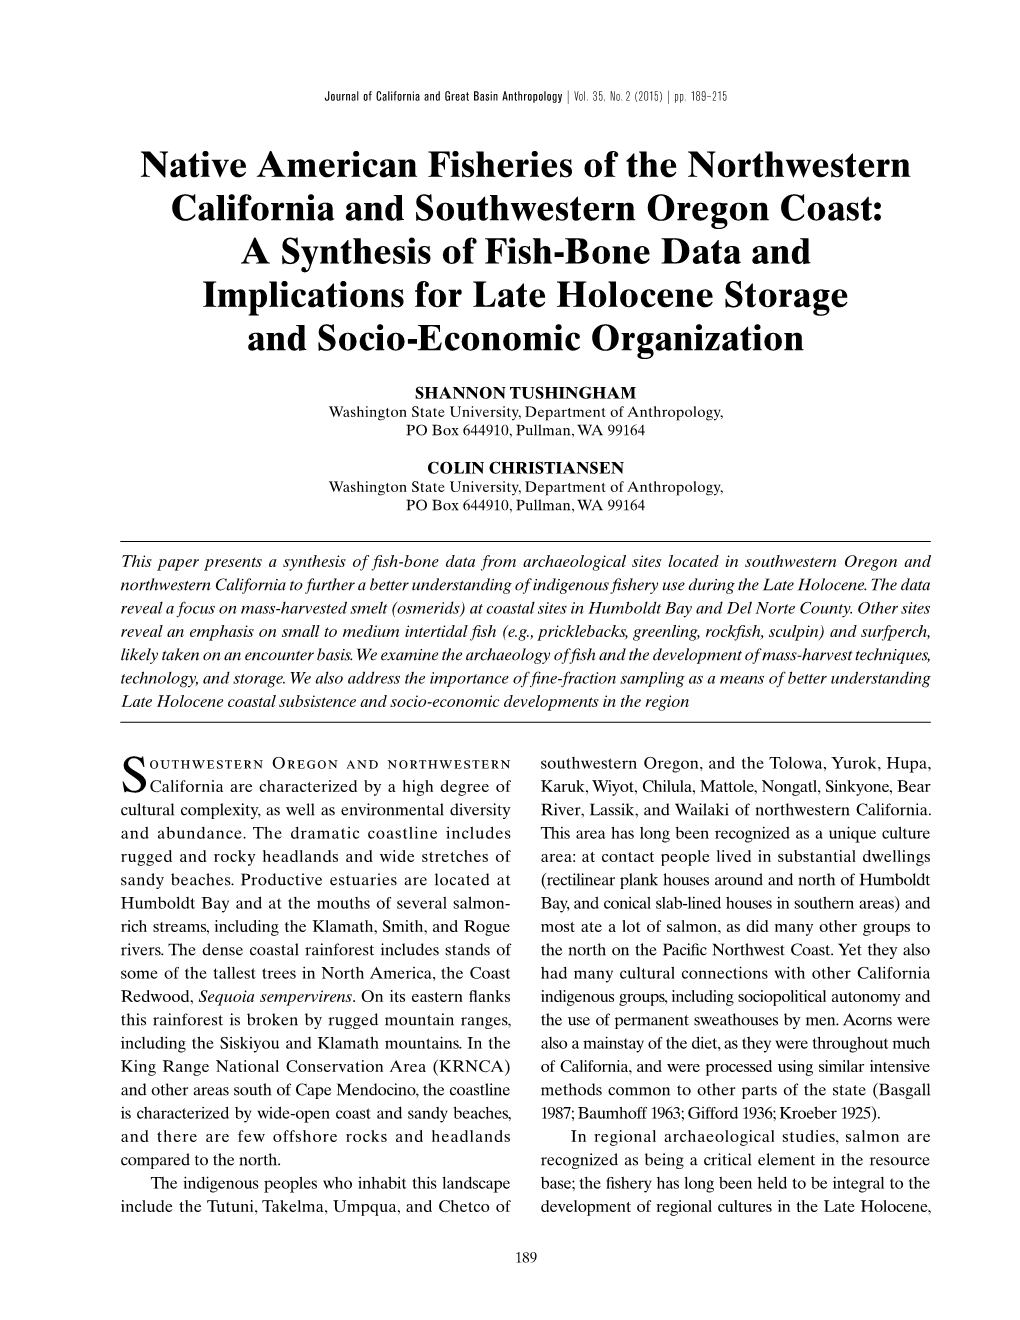 Native American Fisheries of the Northwestern California And